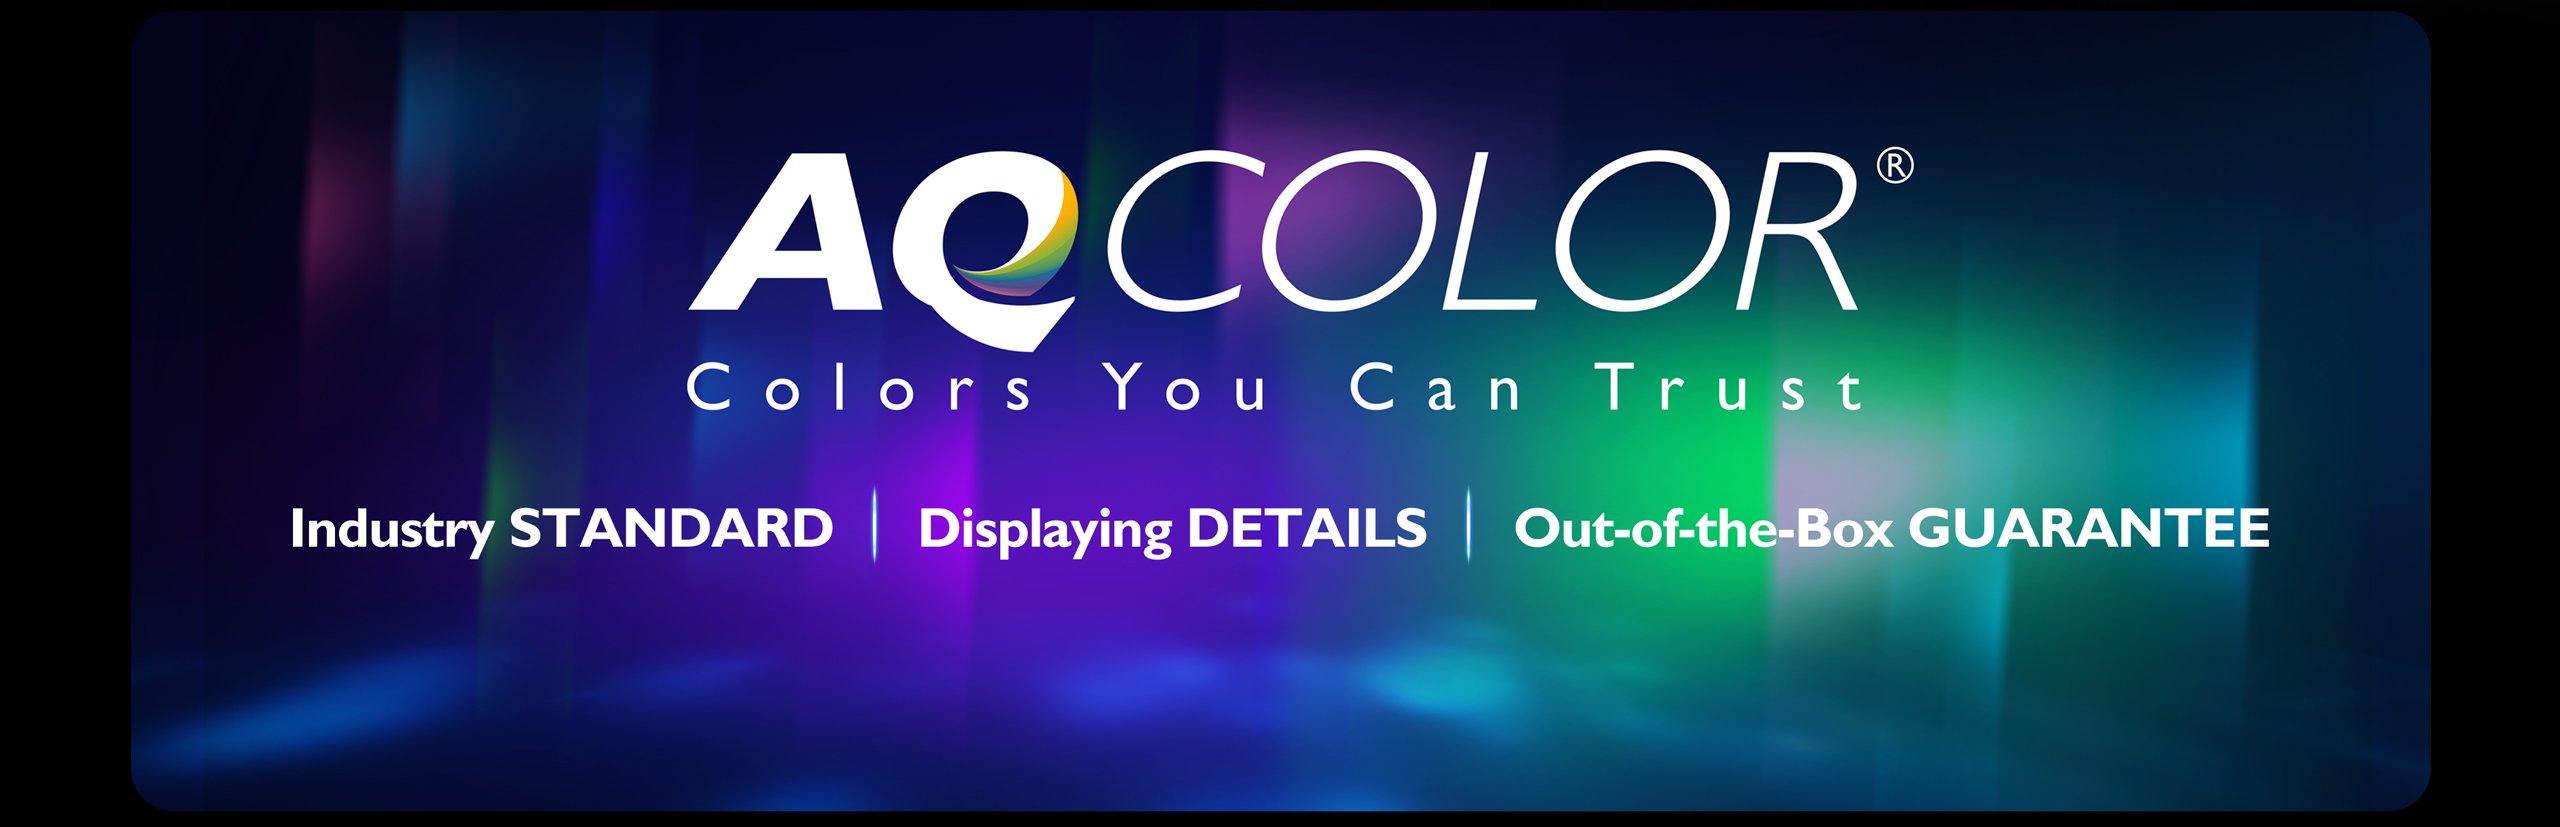 AQCOLOR technology comes with industry standard, displaying details and out-of-the-box gurantee